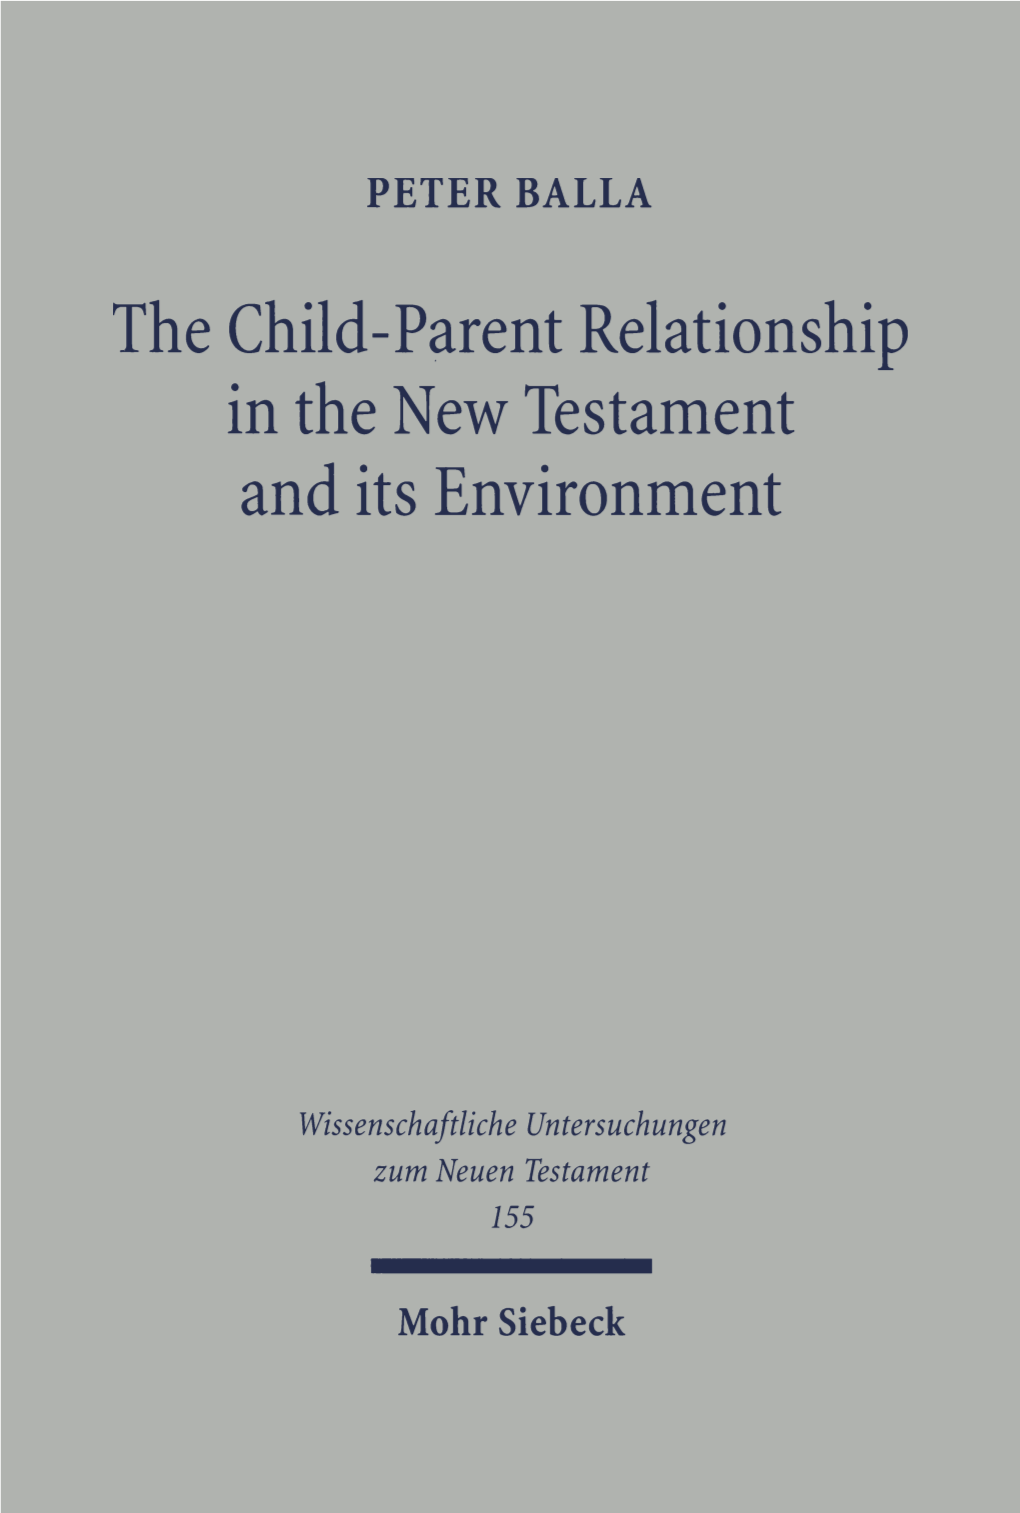 The Child-Parent Relationship in the New Testament and Its Environments